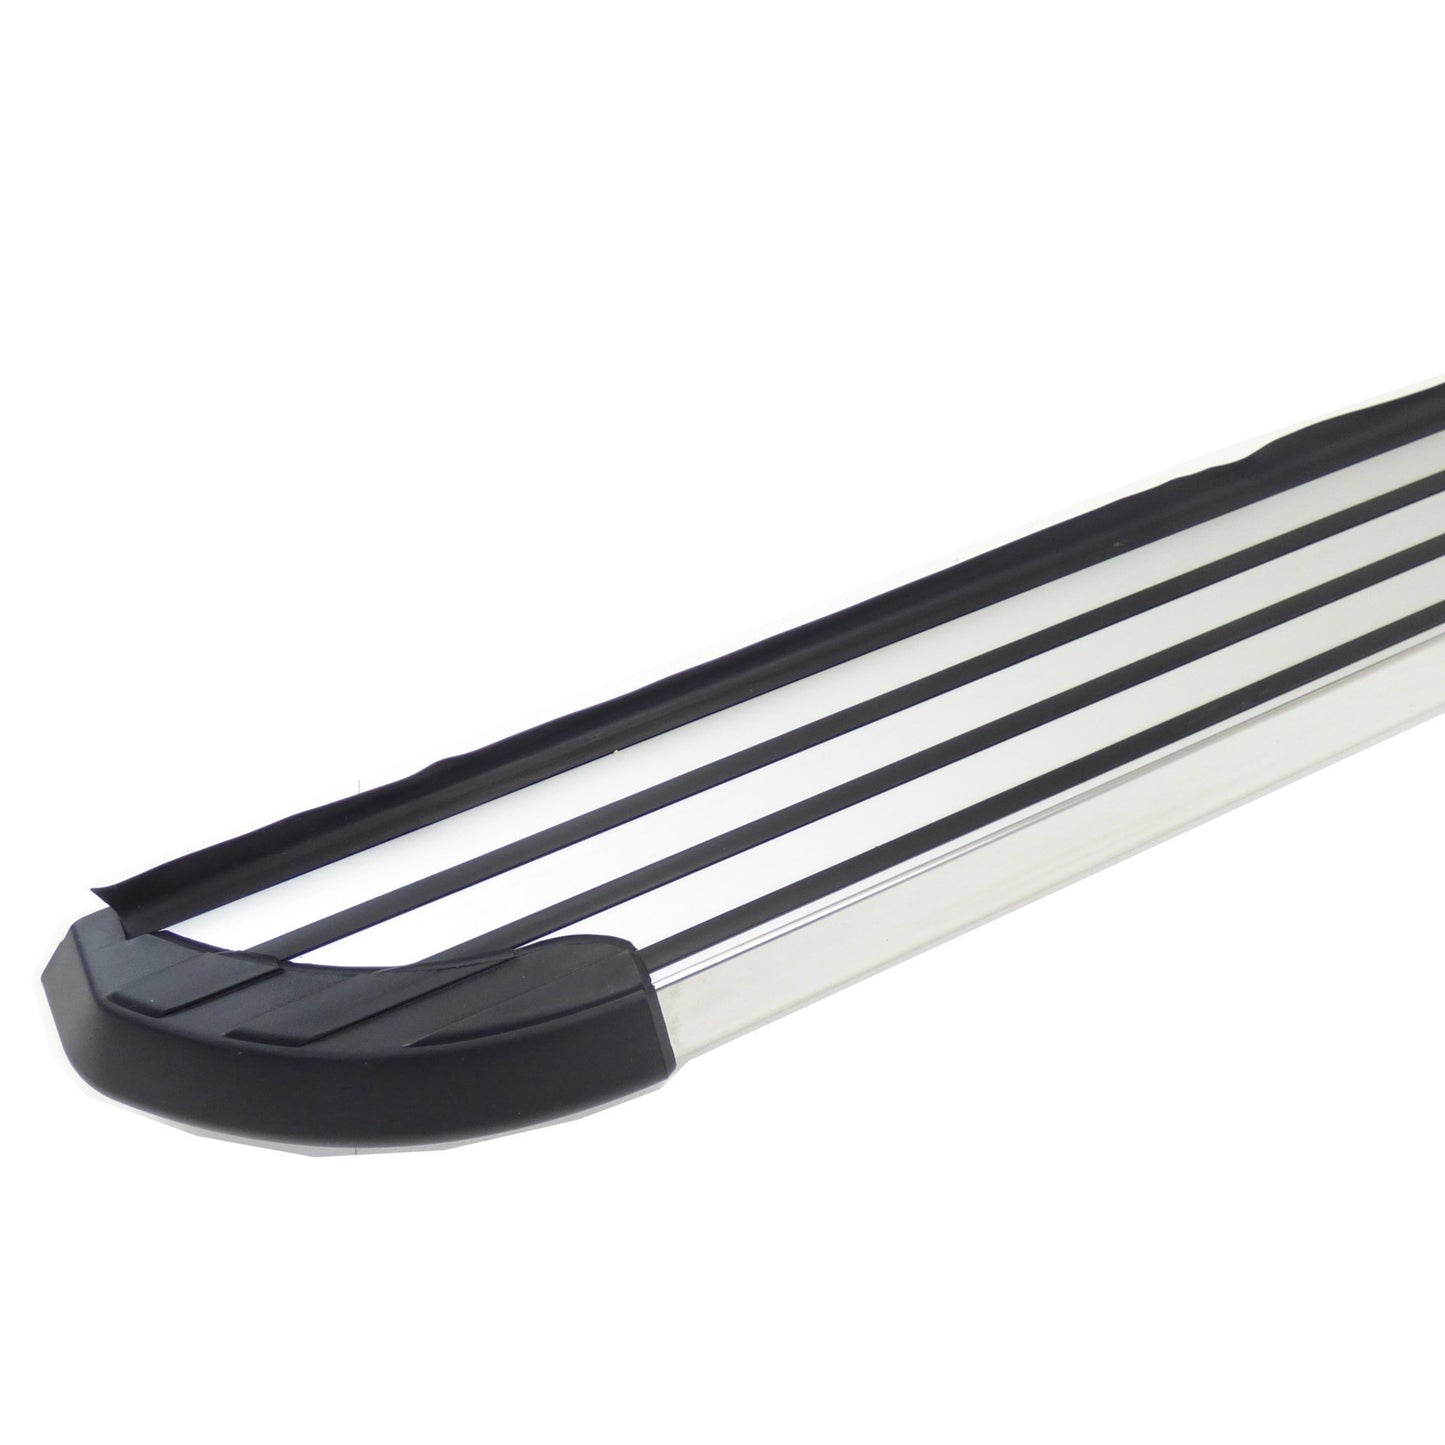 Stingray Side Steps Running Boards for Kia Sorento 2009-2013 -  - sold by Direct4x4